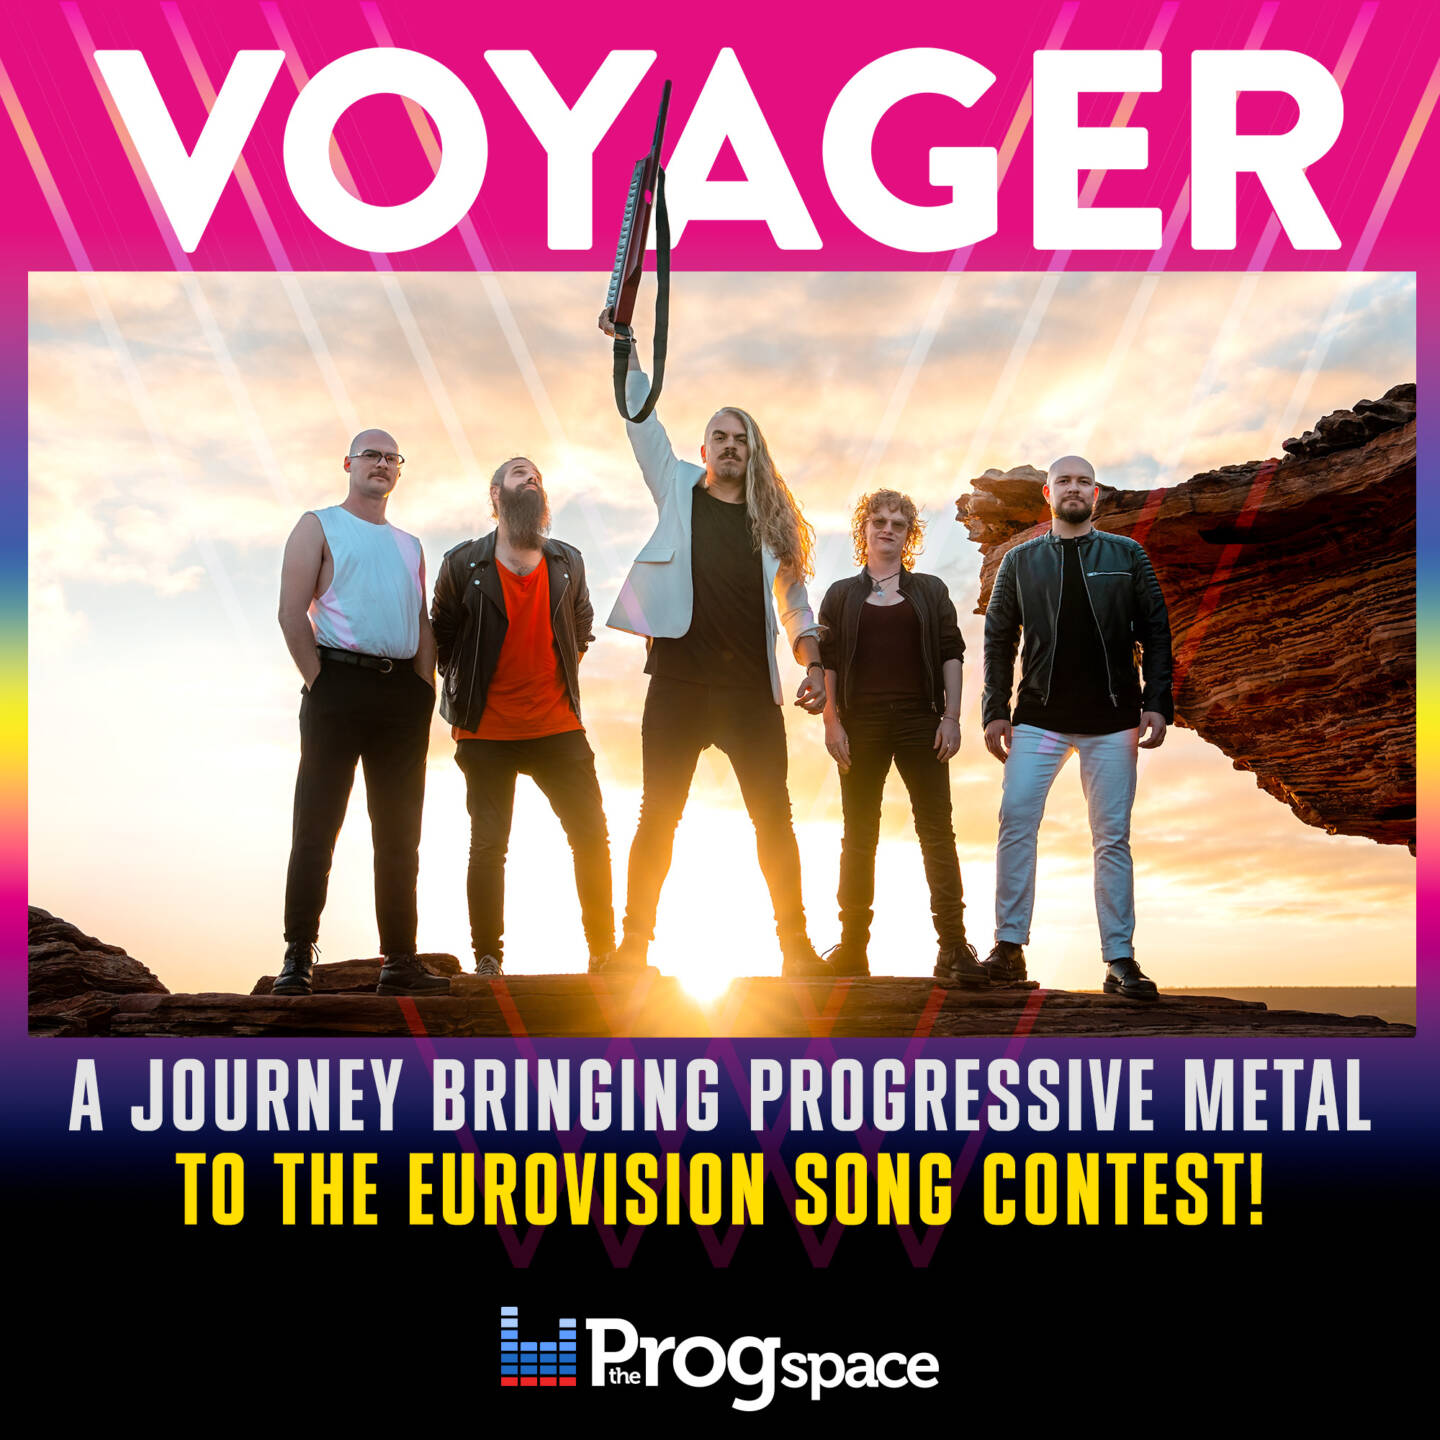 VOYAGER: a journey bringing Progressive Metal to the Eurovision Song Contest!